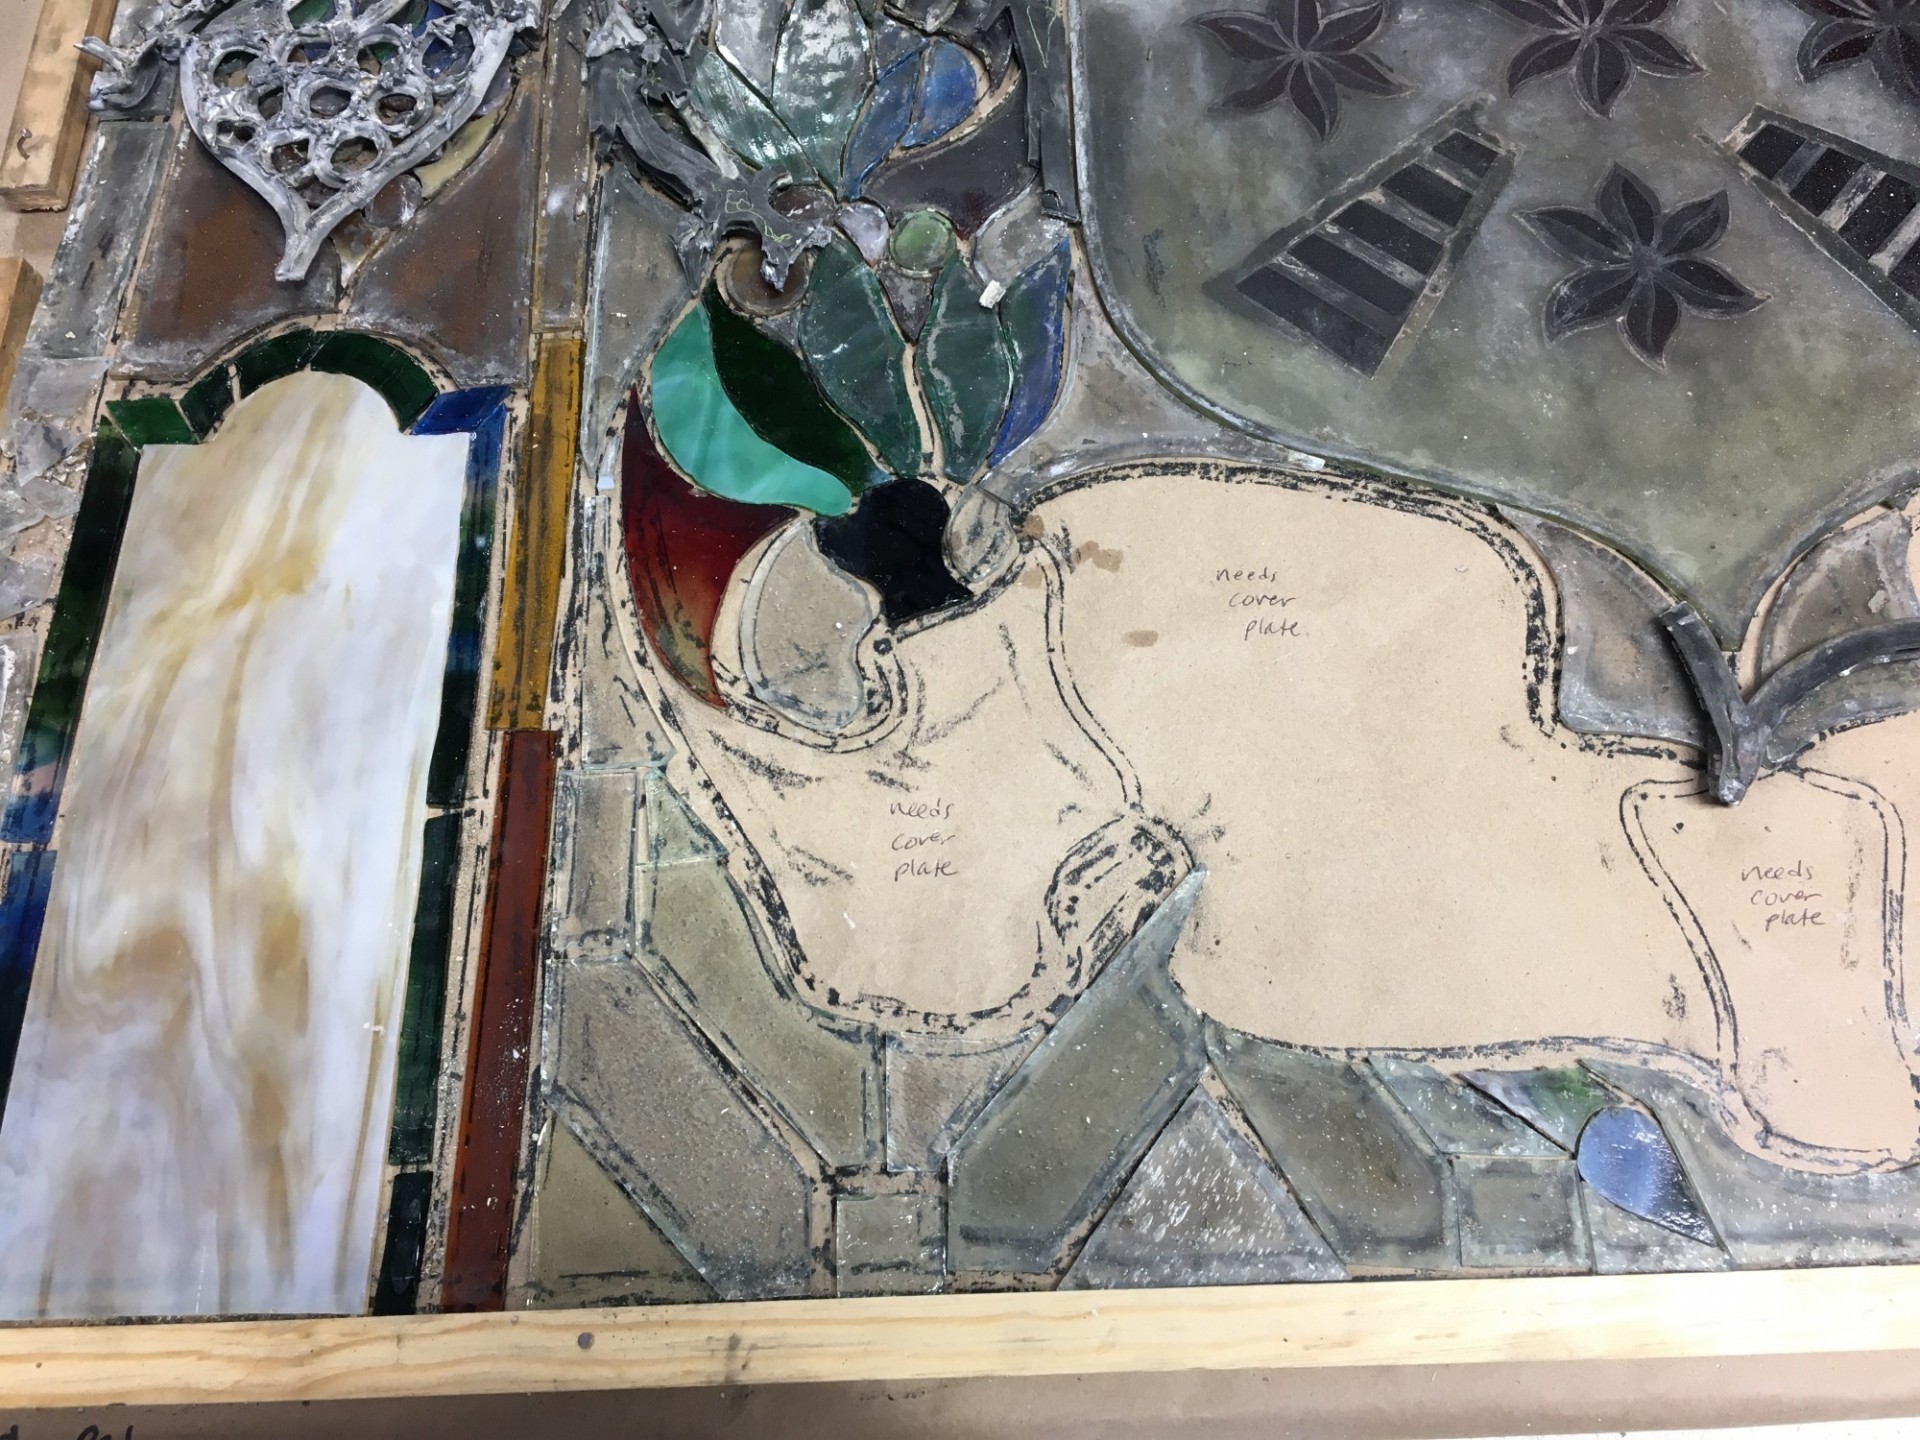 Stained glass window under repair